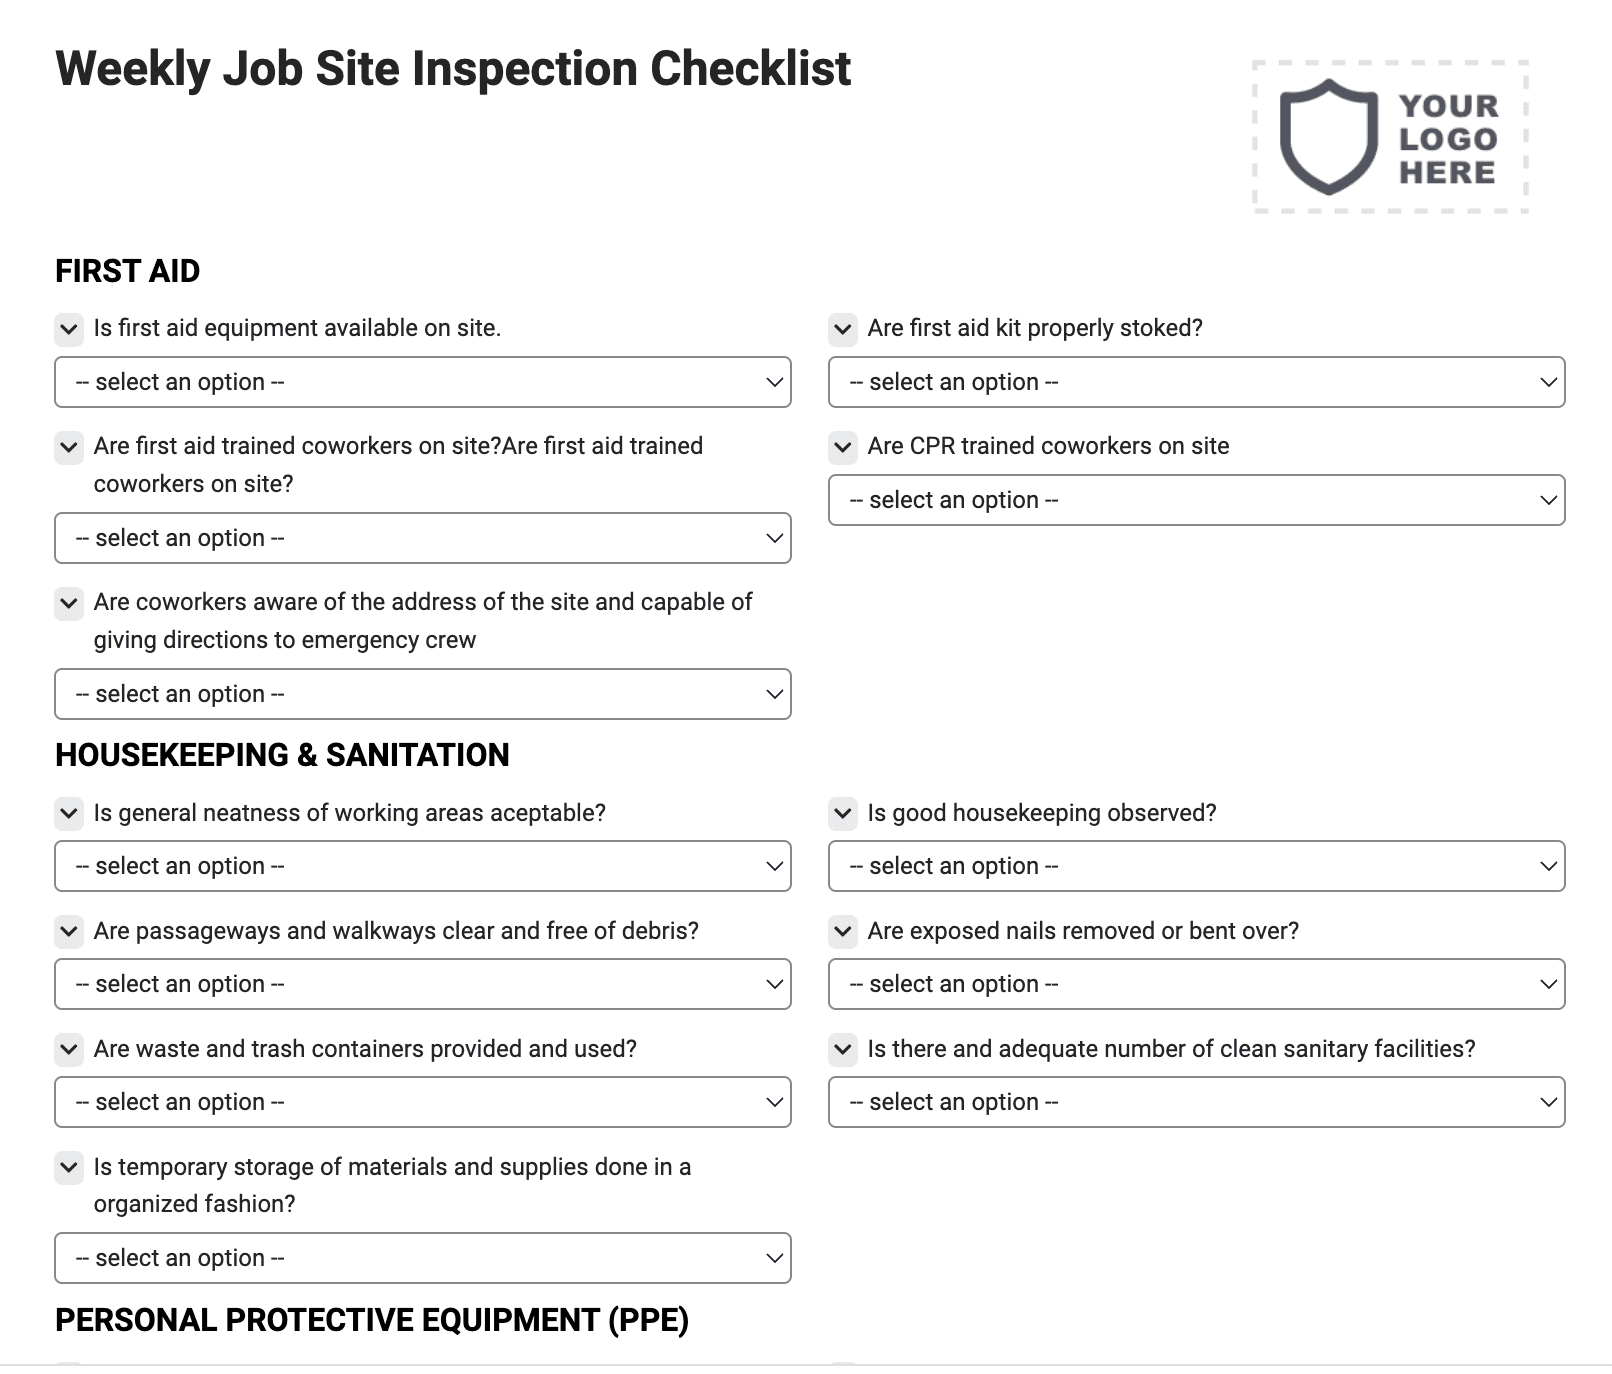 Weekly Job Site Inspection Checklist